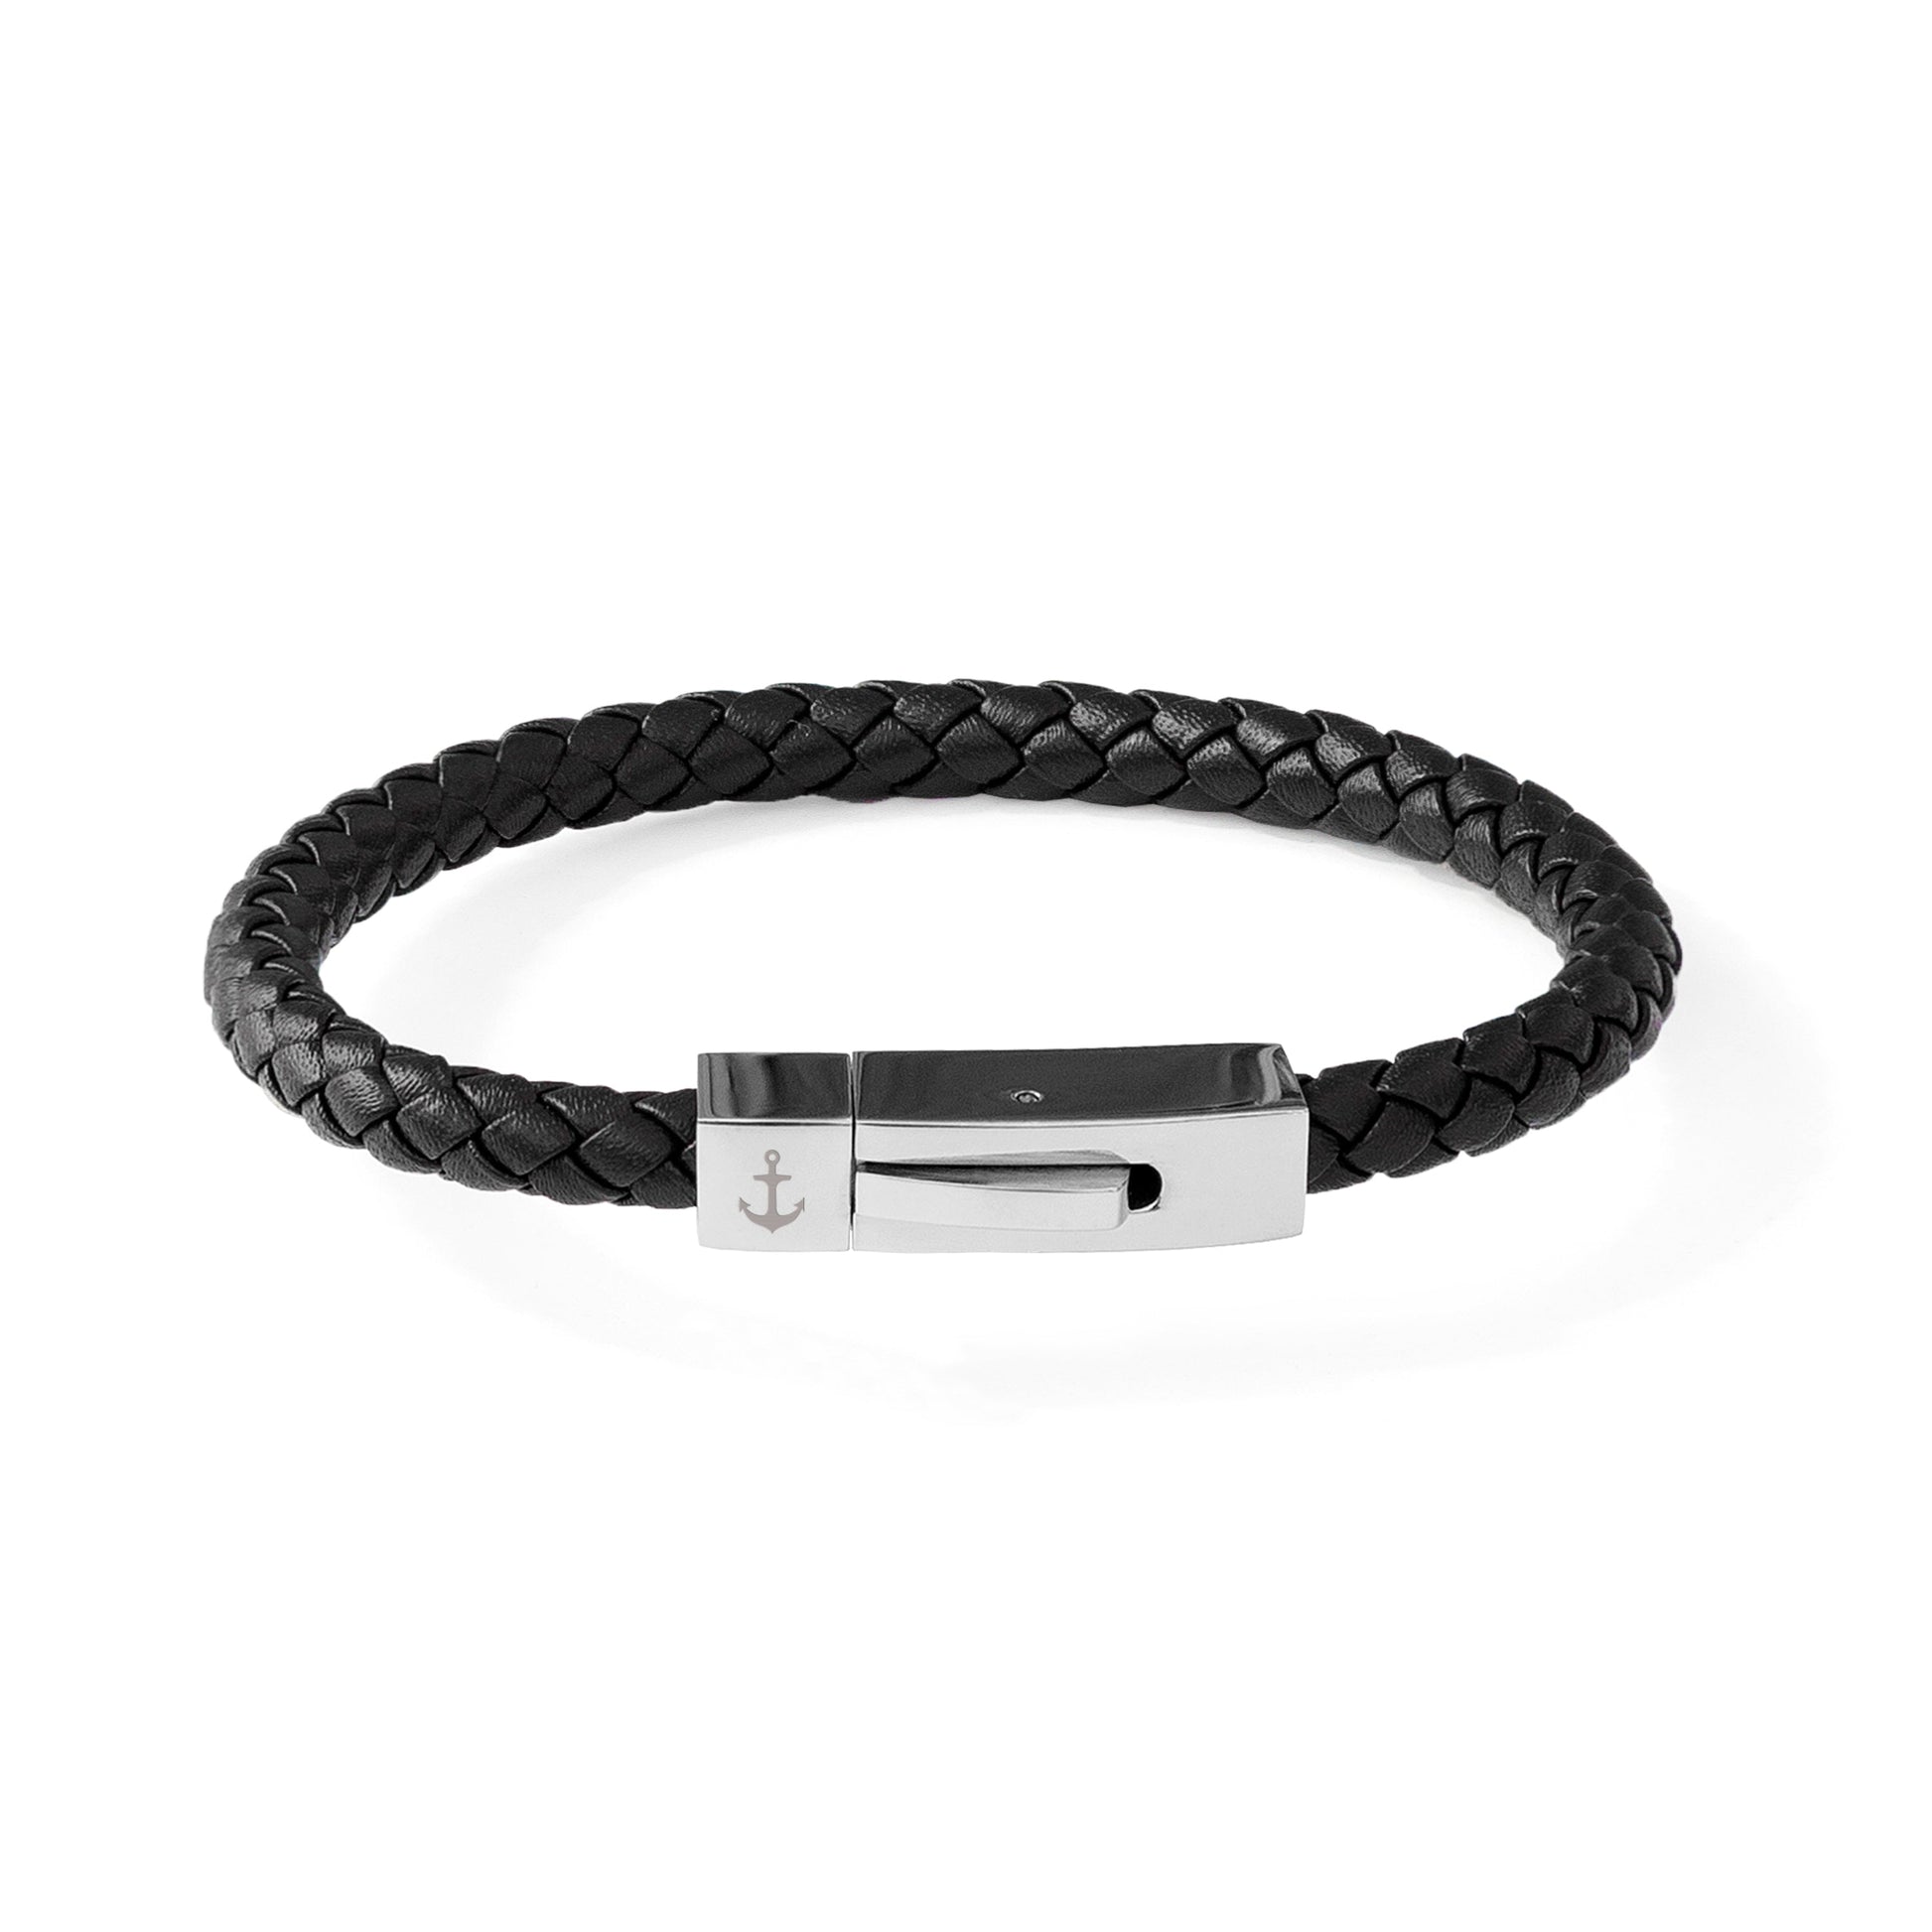 Personalized Men's Bracelets - Personalized Men's Leather Anchor Bracelet With Tube Clasp 